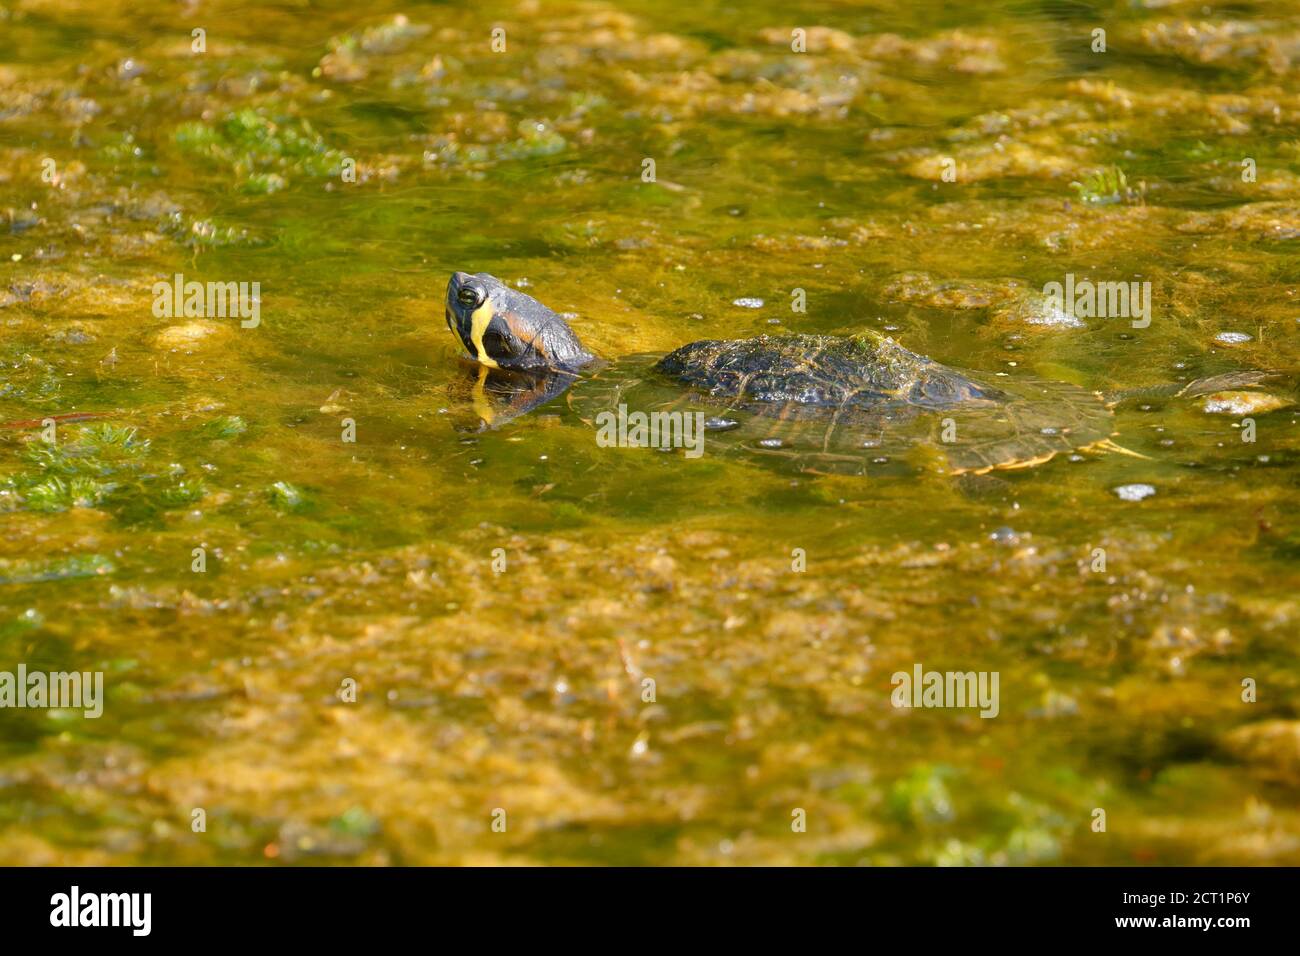 A Yellow Bellied Terrapin(Trachemys scripta scripta) at Temple Newsam in Leeds,UK. Possibly released as an unwanted pet. Stock Photo